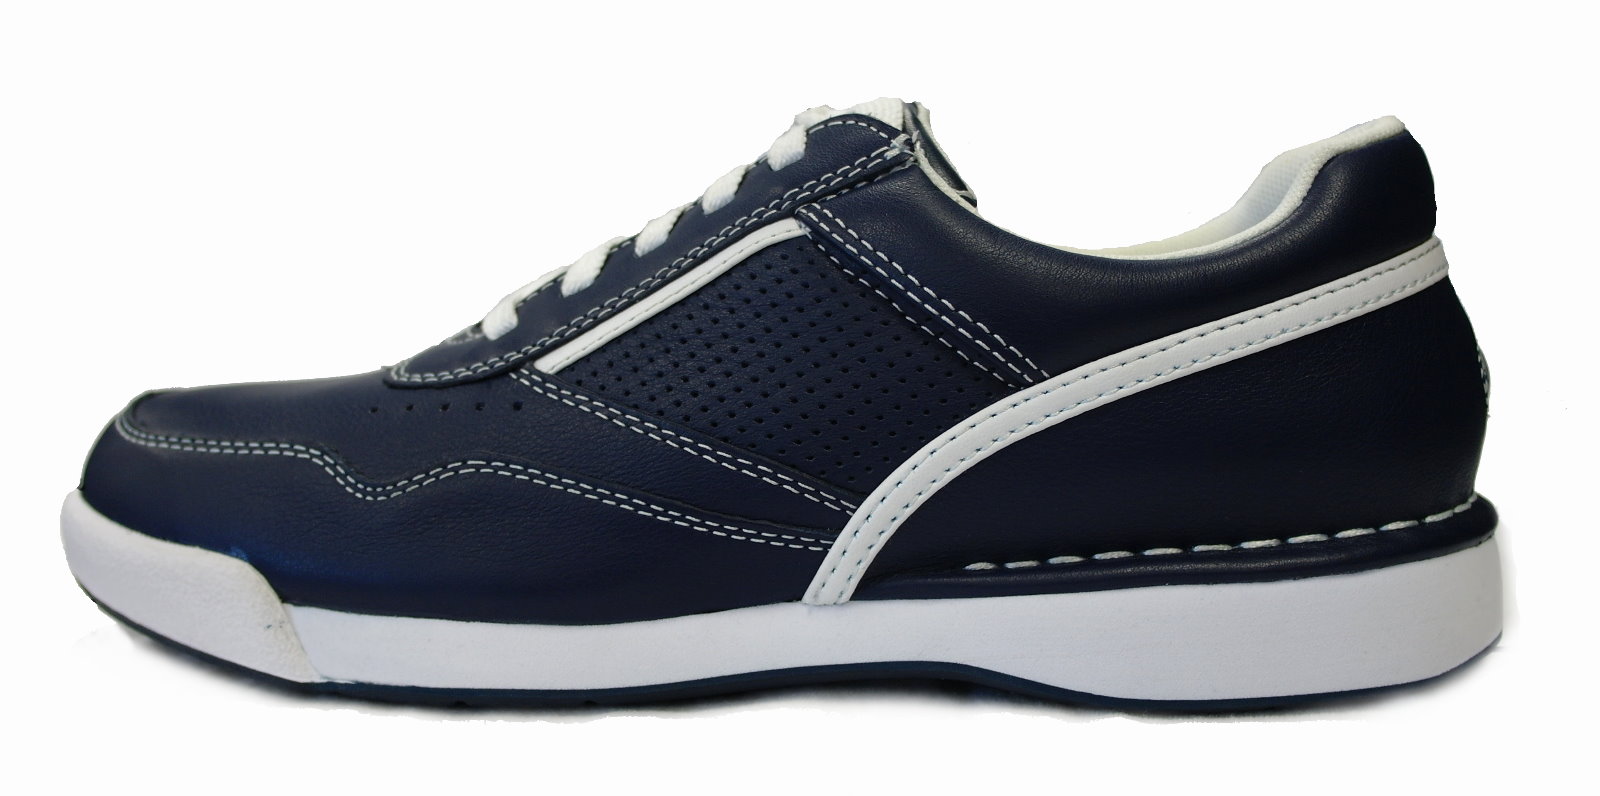 rockport navy shoes